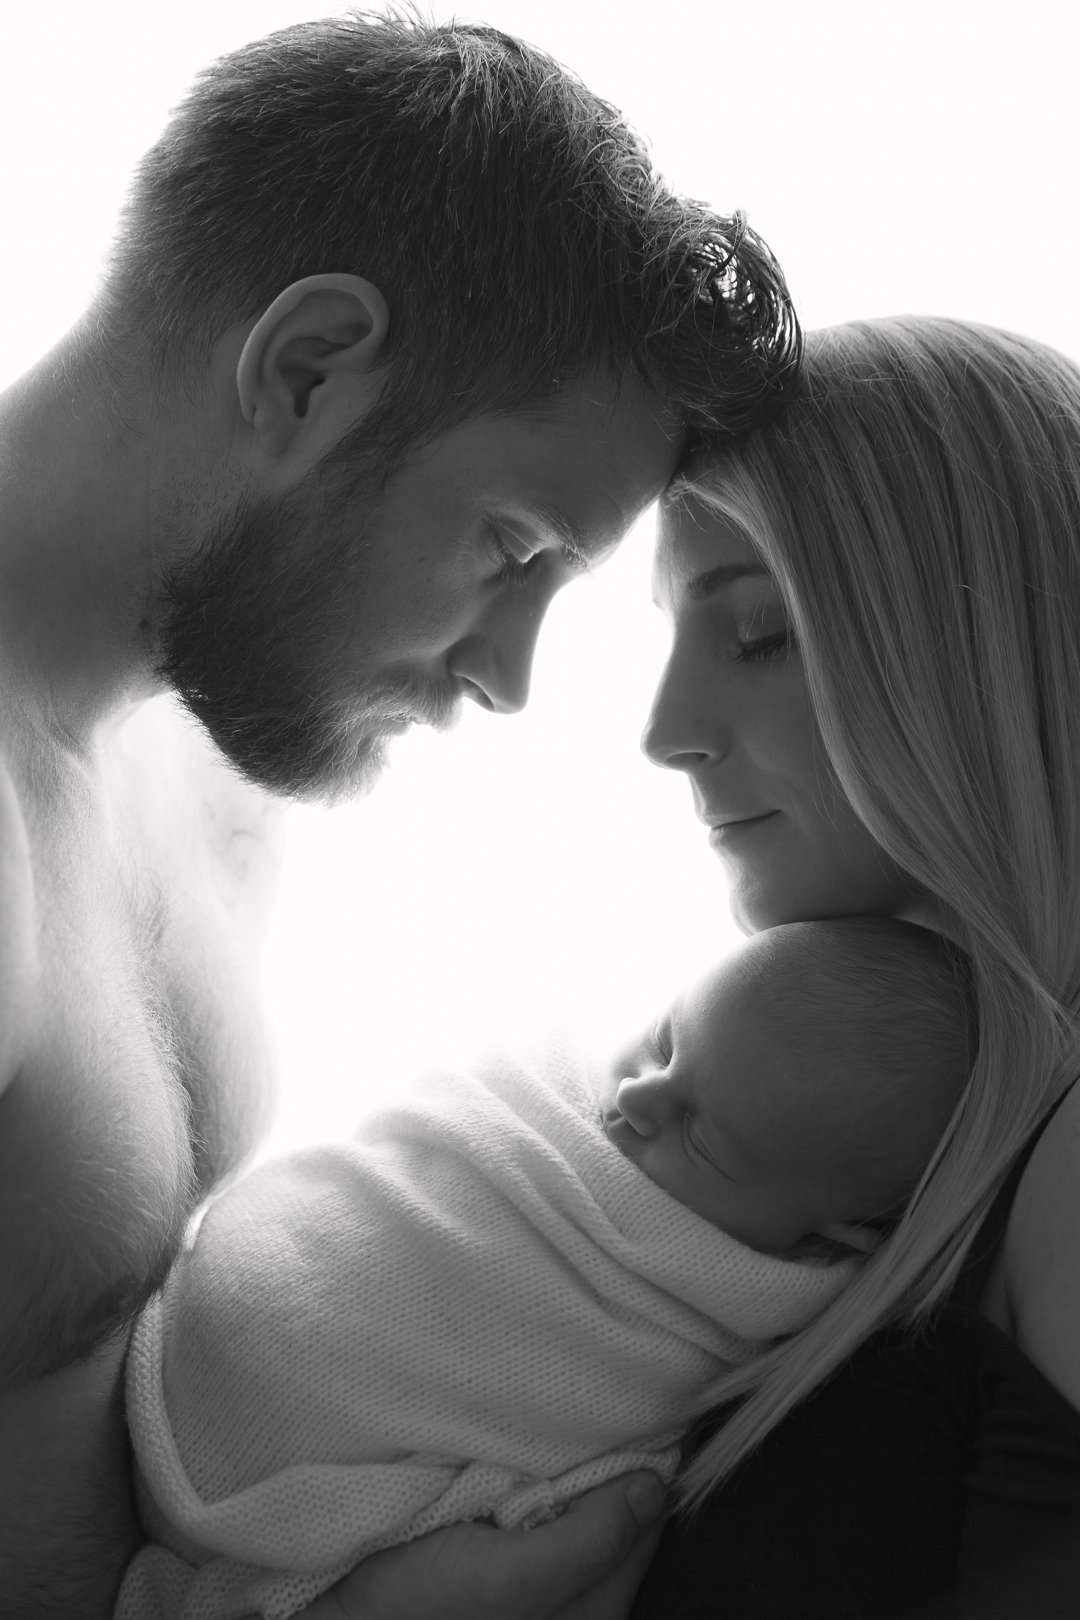 Newborn baby photography by hayley morris photography - newborn photographer - image shows a backlit black and white photo of two parents facing in towards each other and holding their wrapped baby lay between them